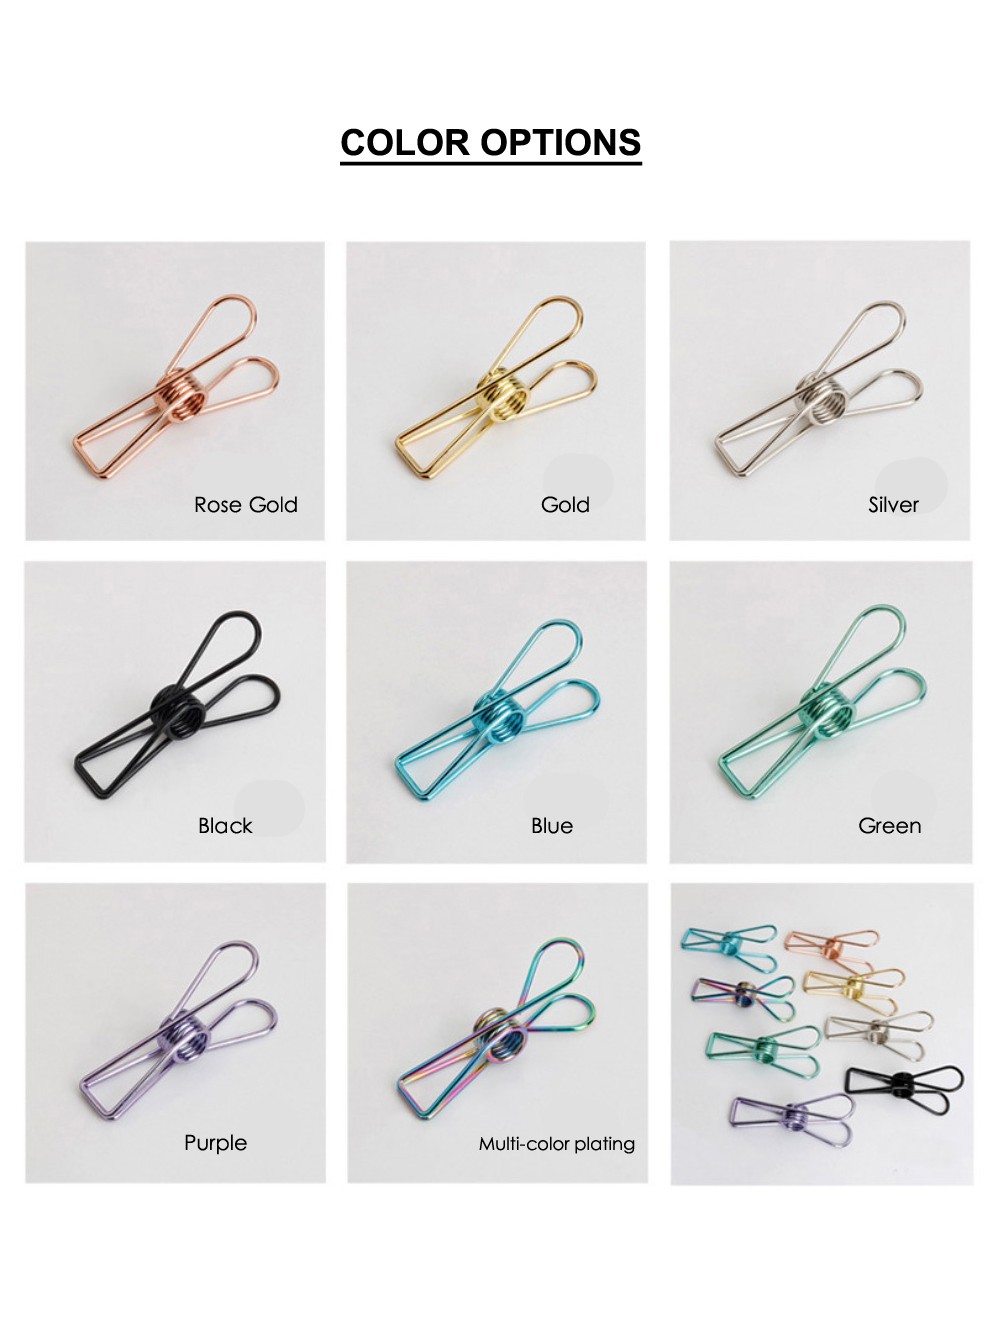 Binder Clips | Fish-mouth Binding Clips | Creative Stationery